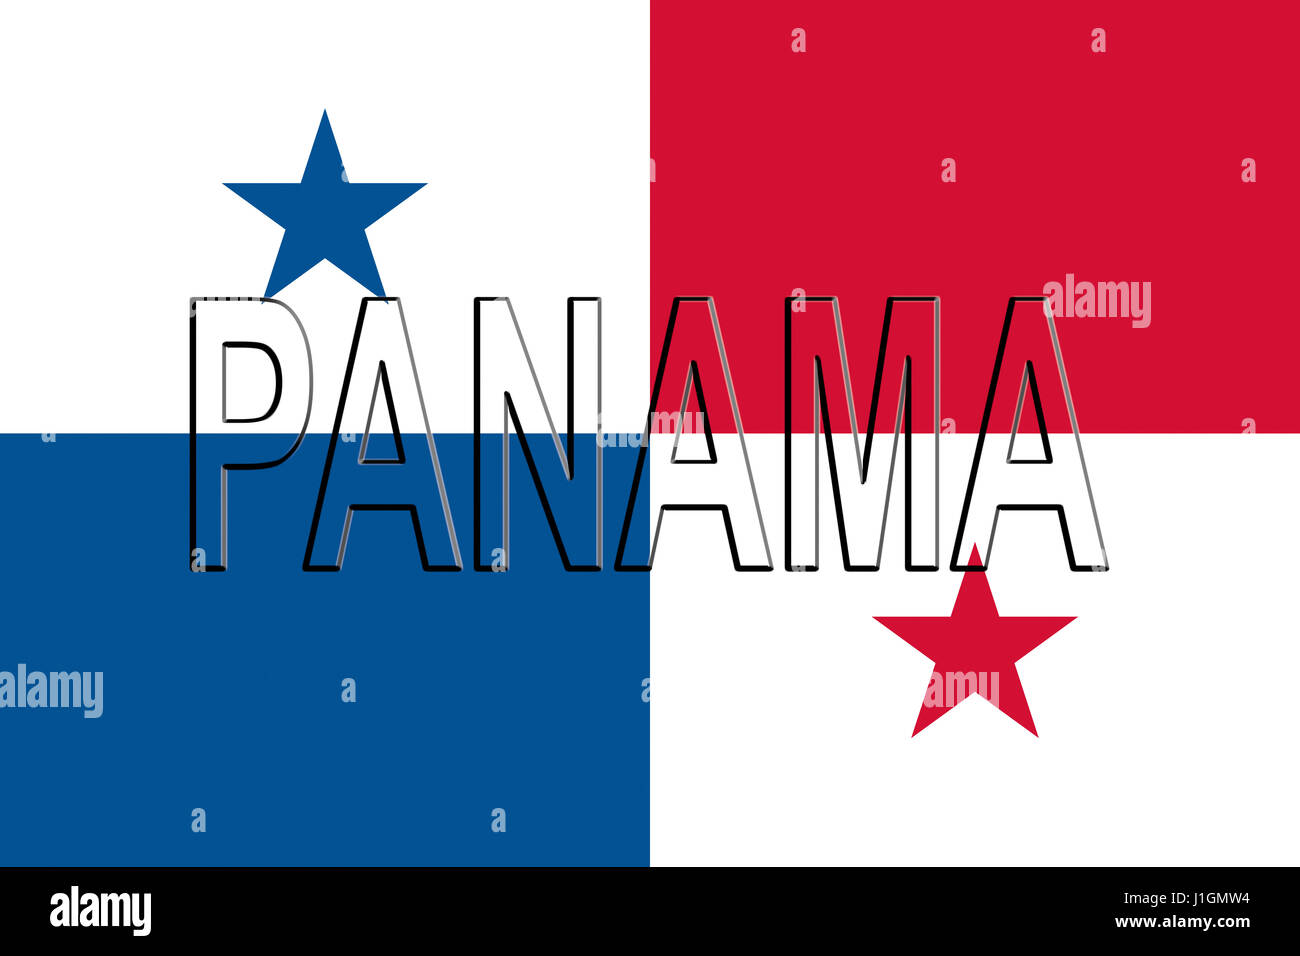 Illustration of the flag of Panama with the country written on the flag. Stock Photo